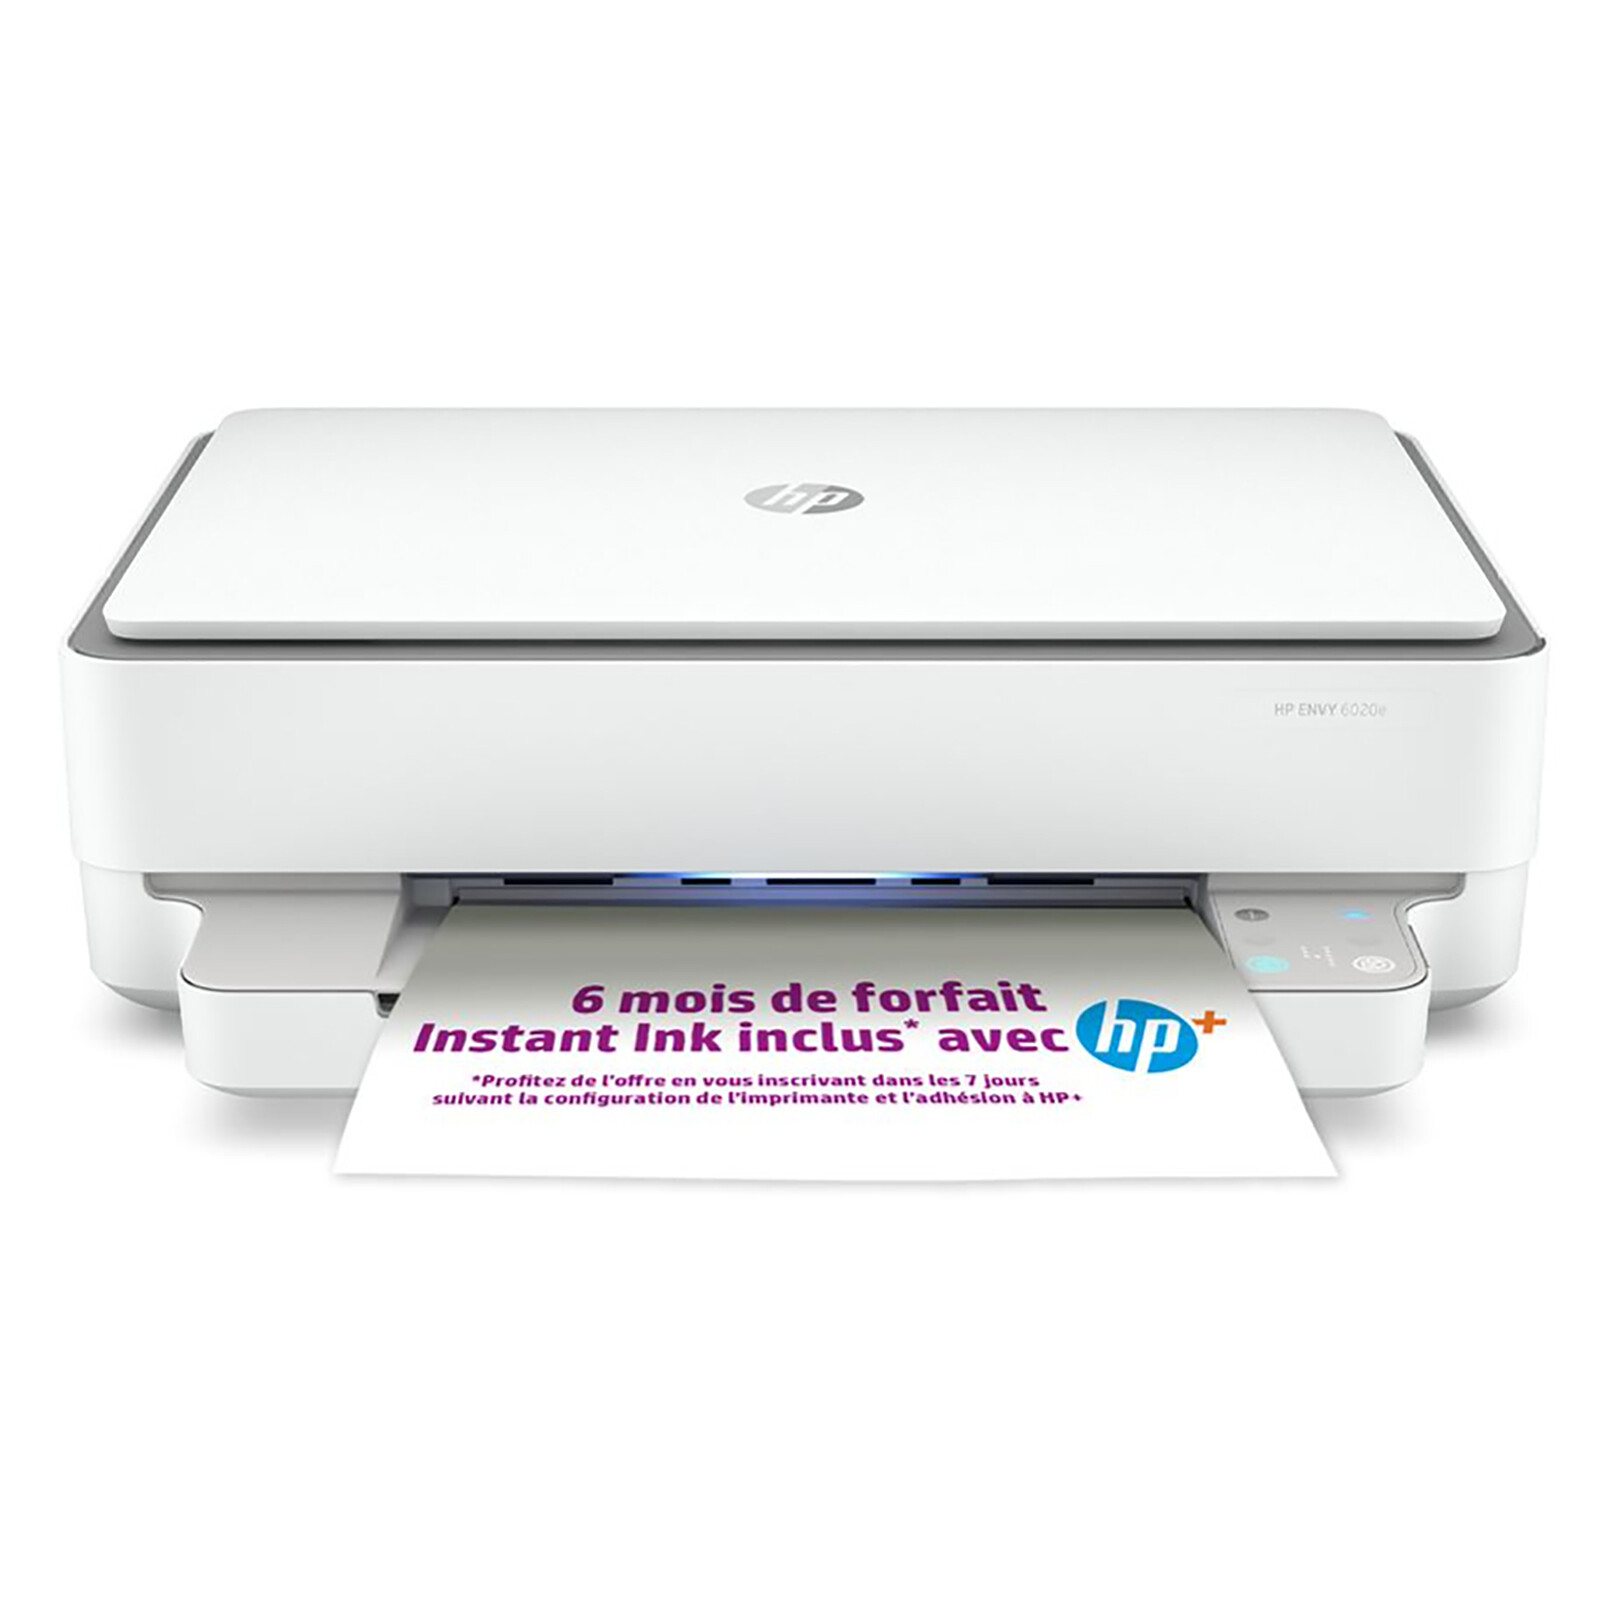 HP Envy 6020e All-In-One - All-in-one printer - LDLC 3-year warranty